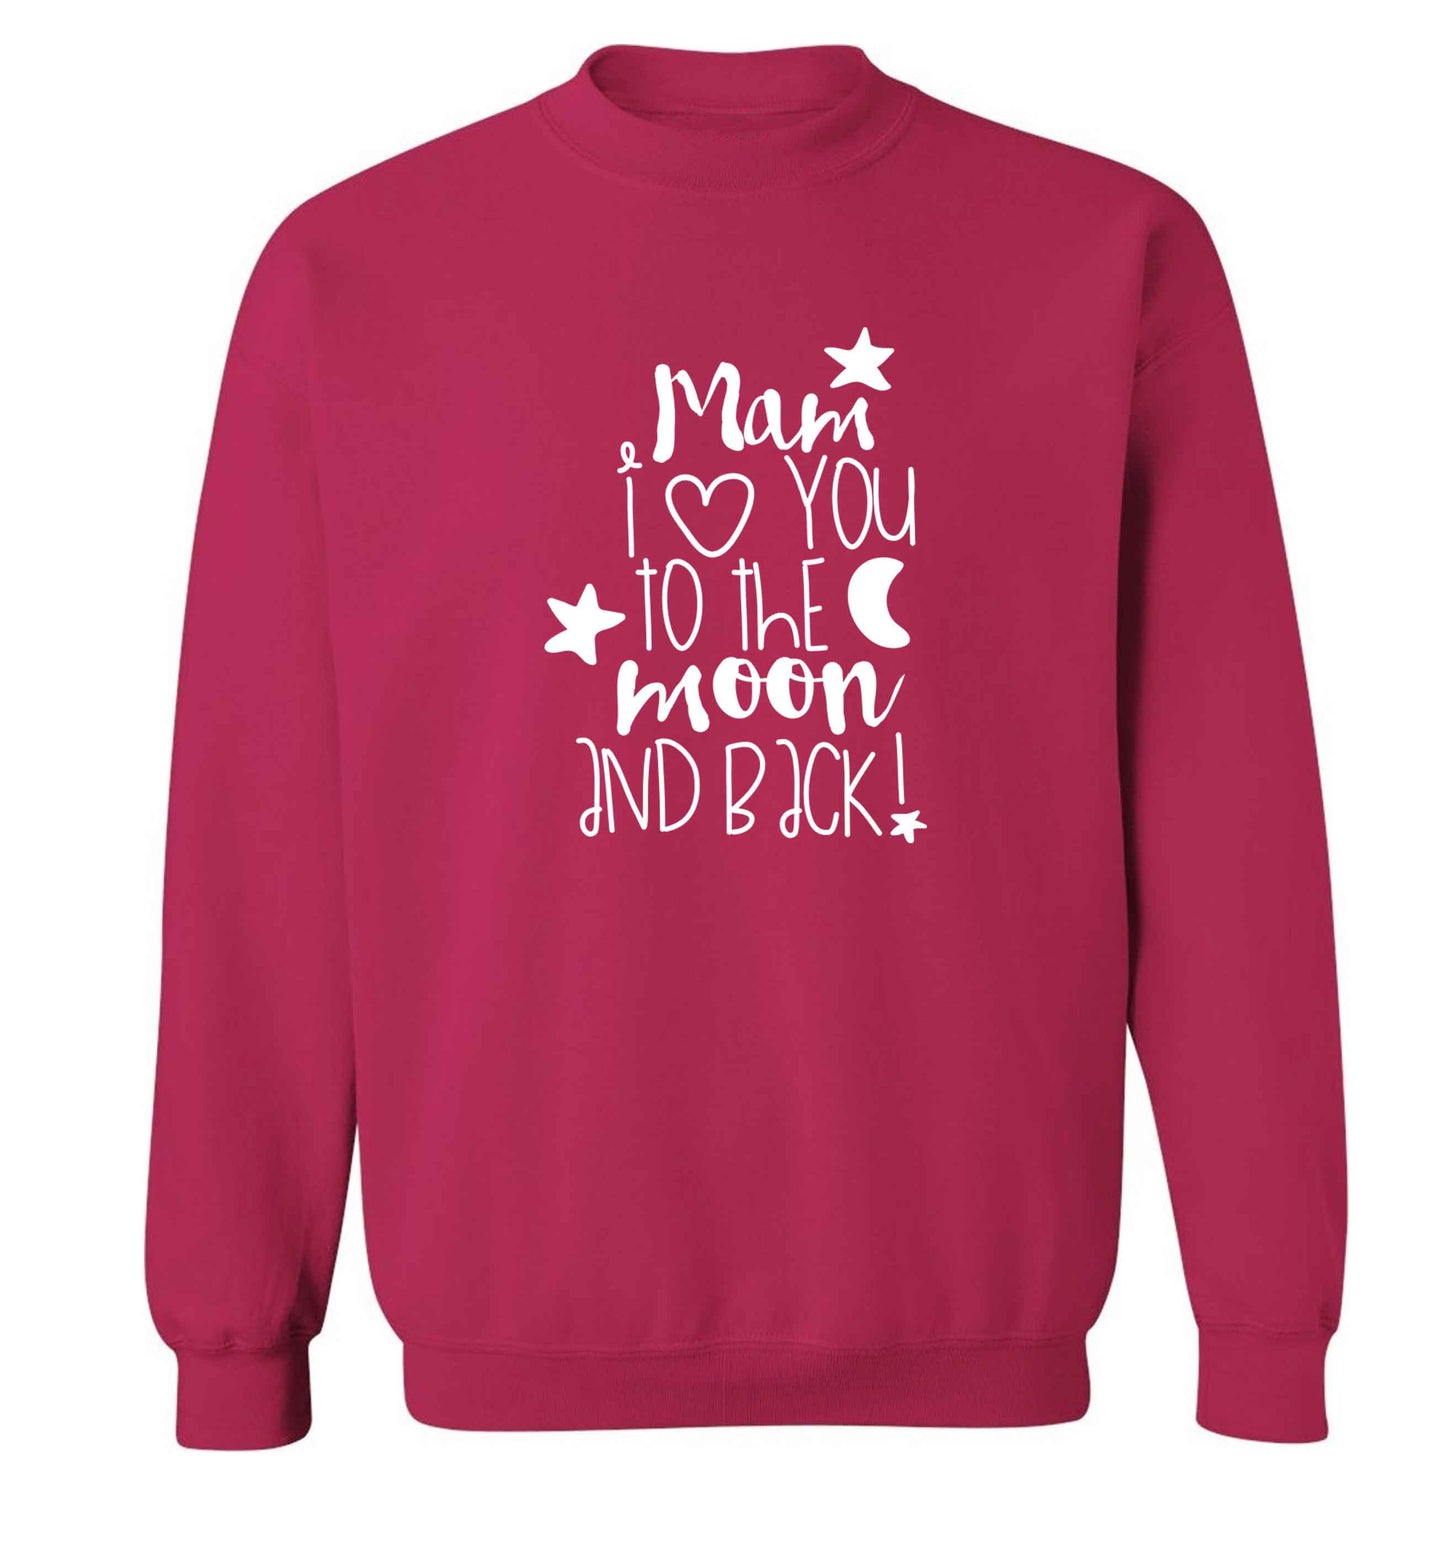 Mam I love you to the moon and back adult's unisex pink sweater 2XL